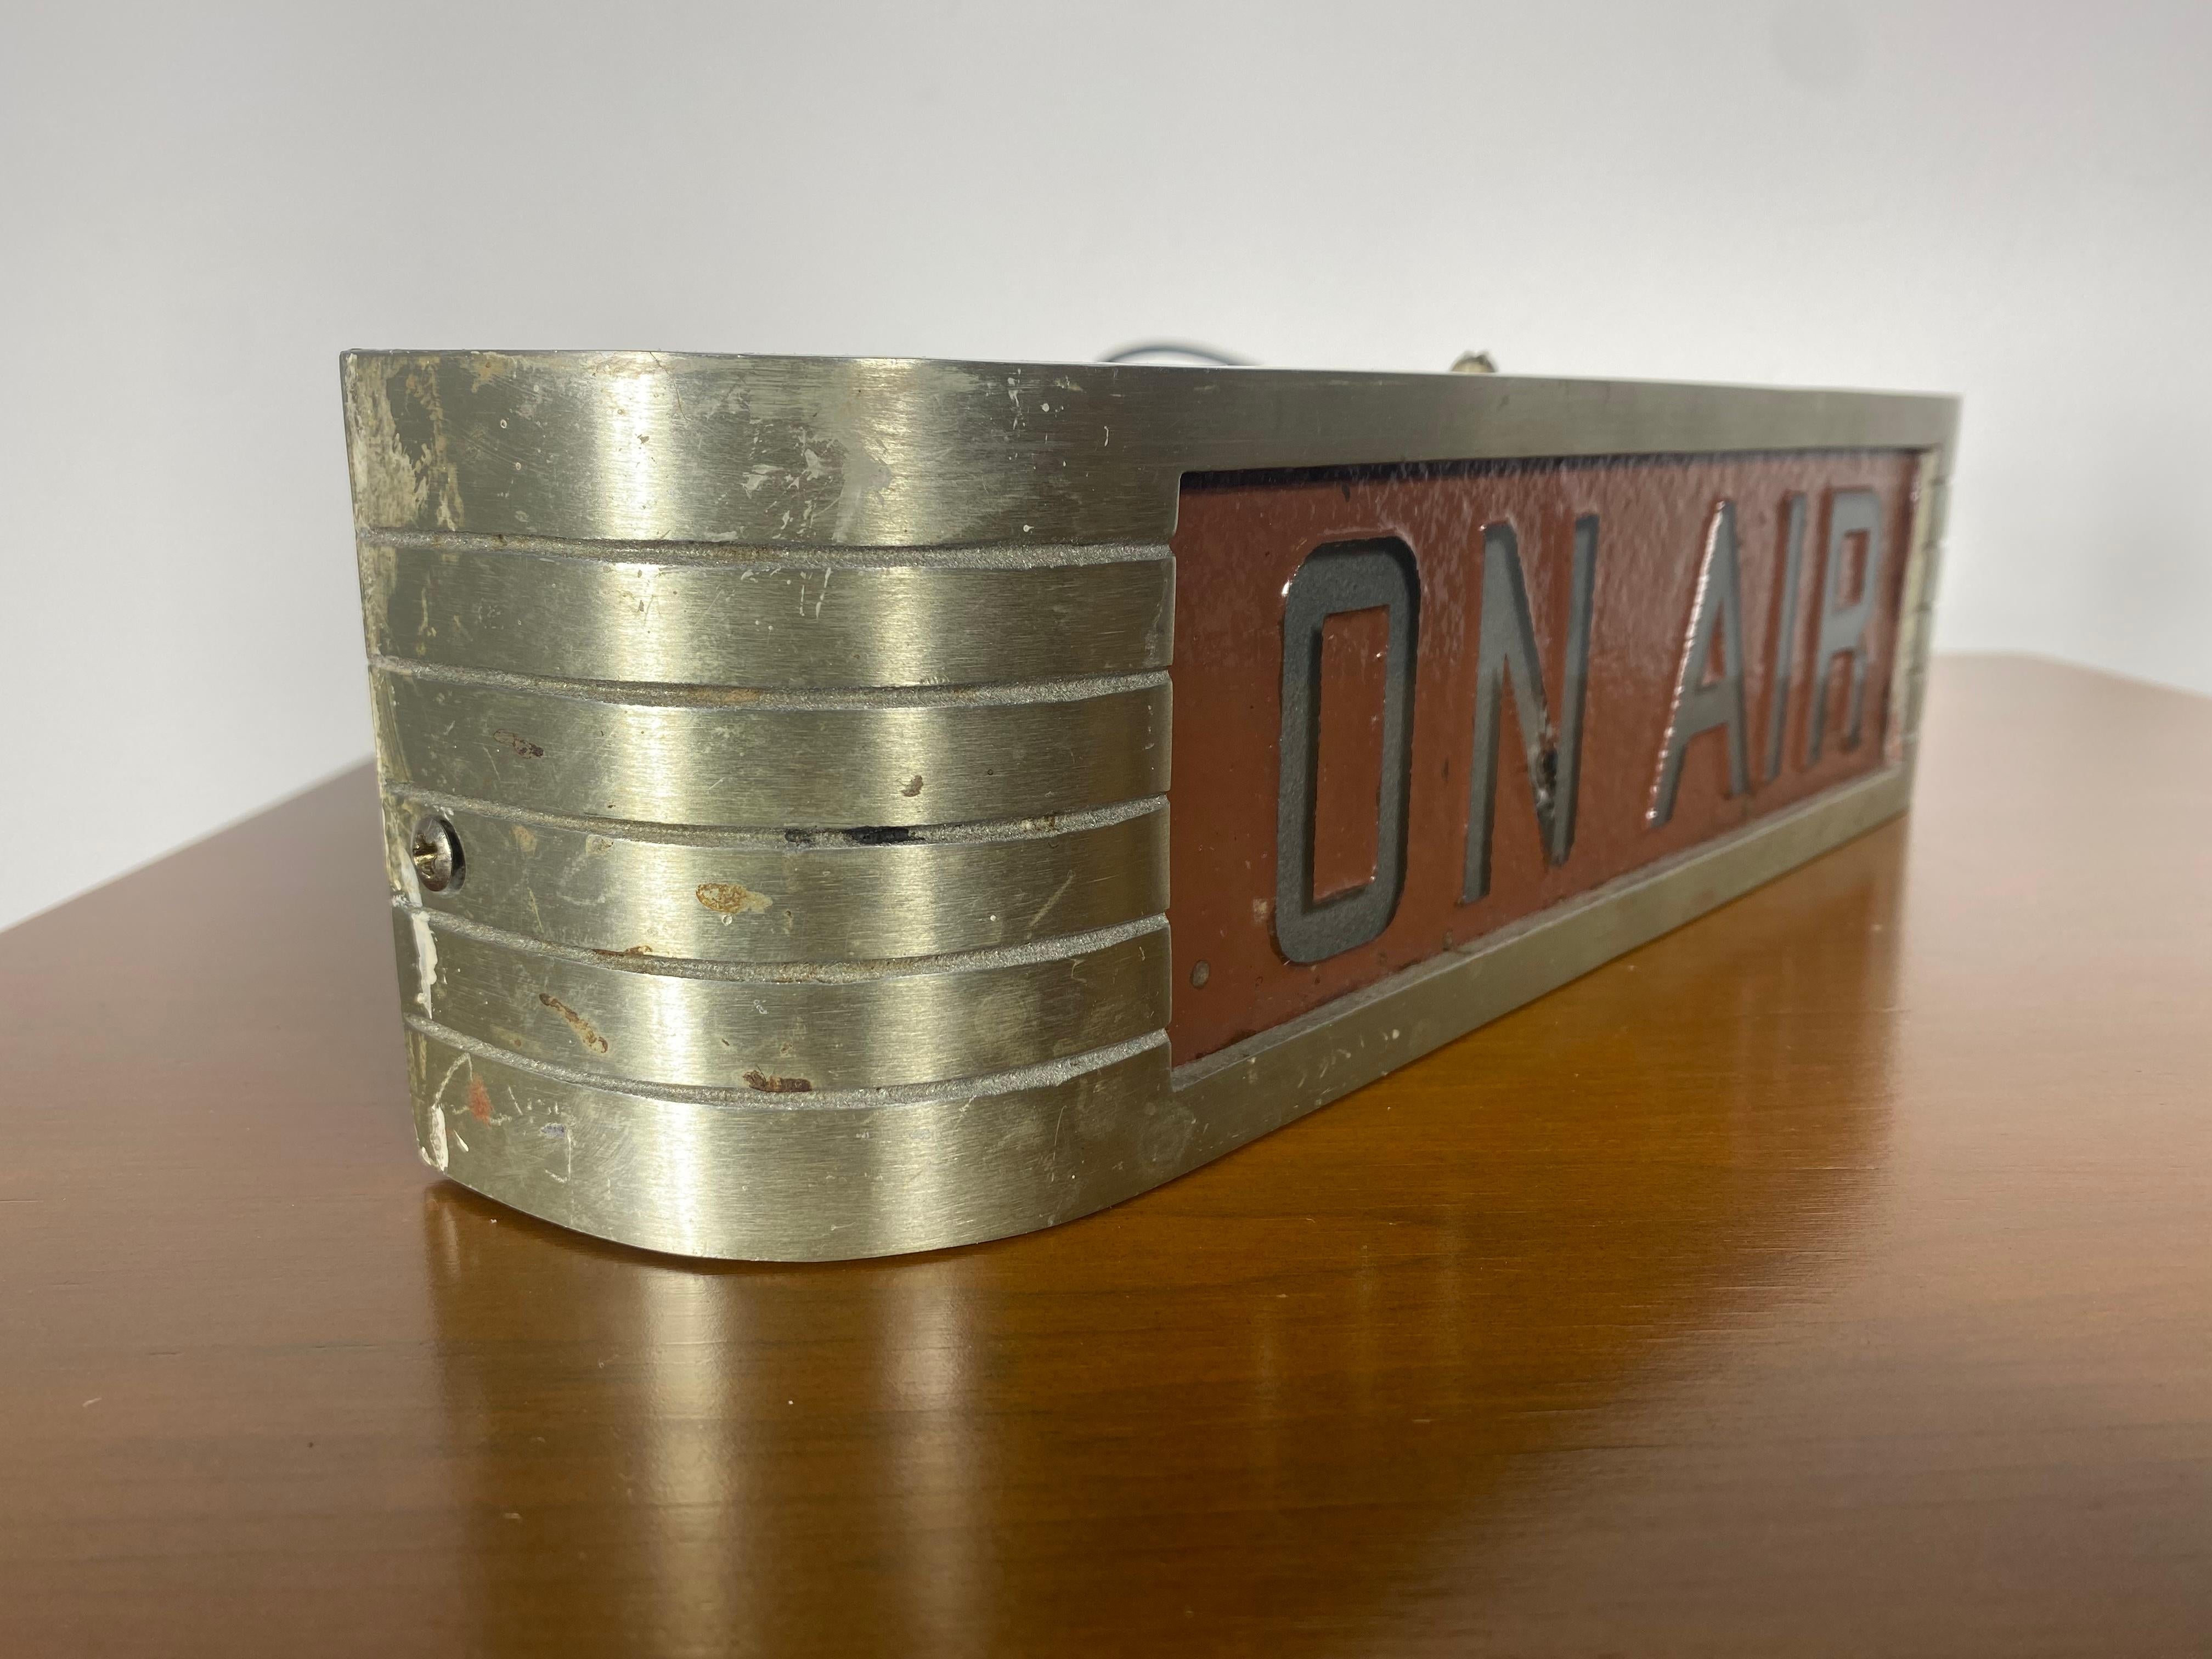 The most iconic “on air” sign warning lights were made by RCA Victor in the 1930s. When radio and television stations were creating live programs, they had to have a signal to let everyone know that they were rolling, and not to interrupt. The body